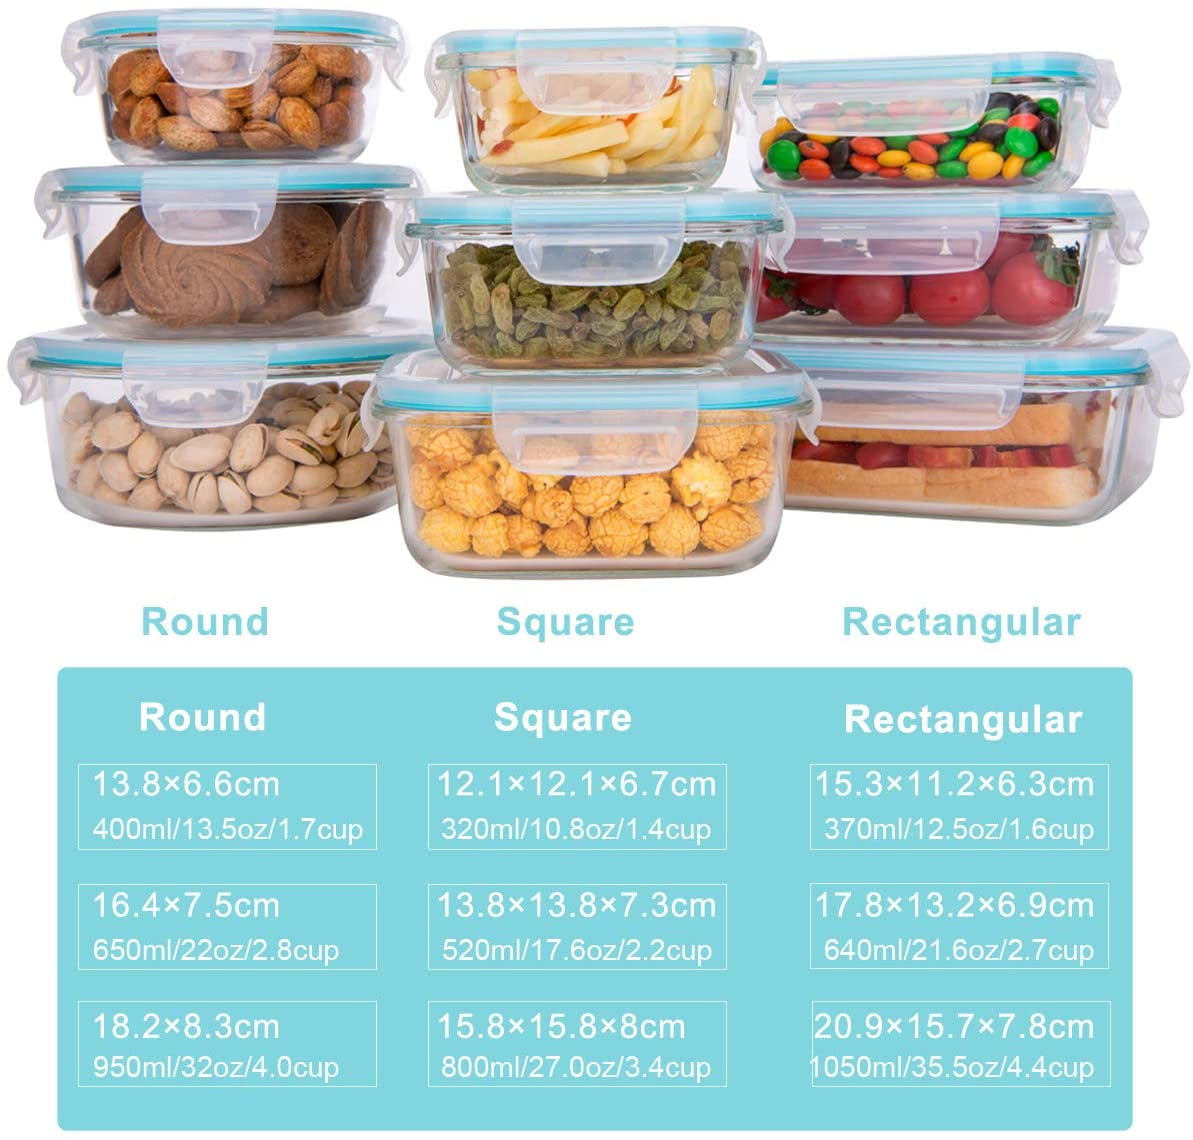 Glass Food Storage Containers with Lids, [18 Piece] Glass Meal Prep Containers, Glass Containers Food Storage Lids, BPA Free & Proof (9 Lids & 9 Containers) - Walmart.com